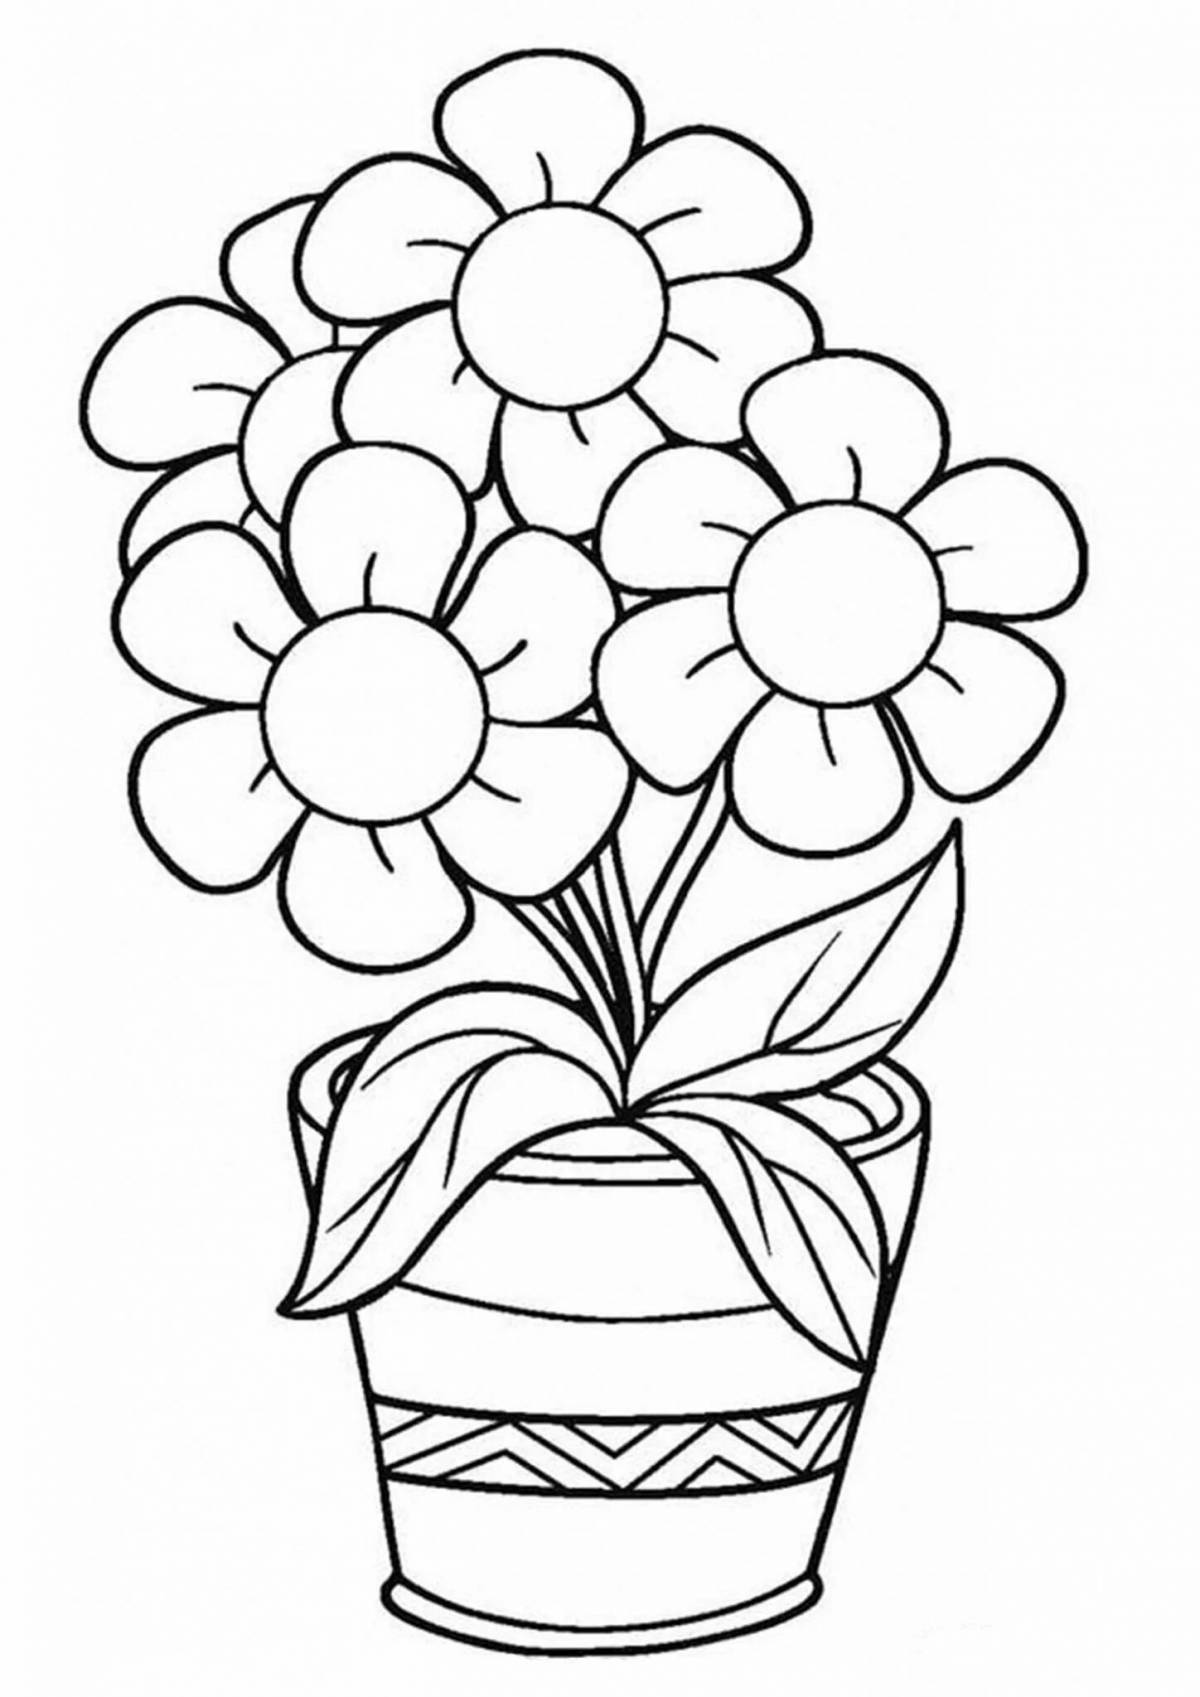 Animated flower coloring book for children 5-6 years old